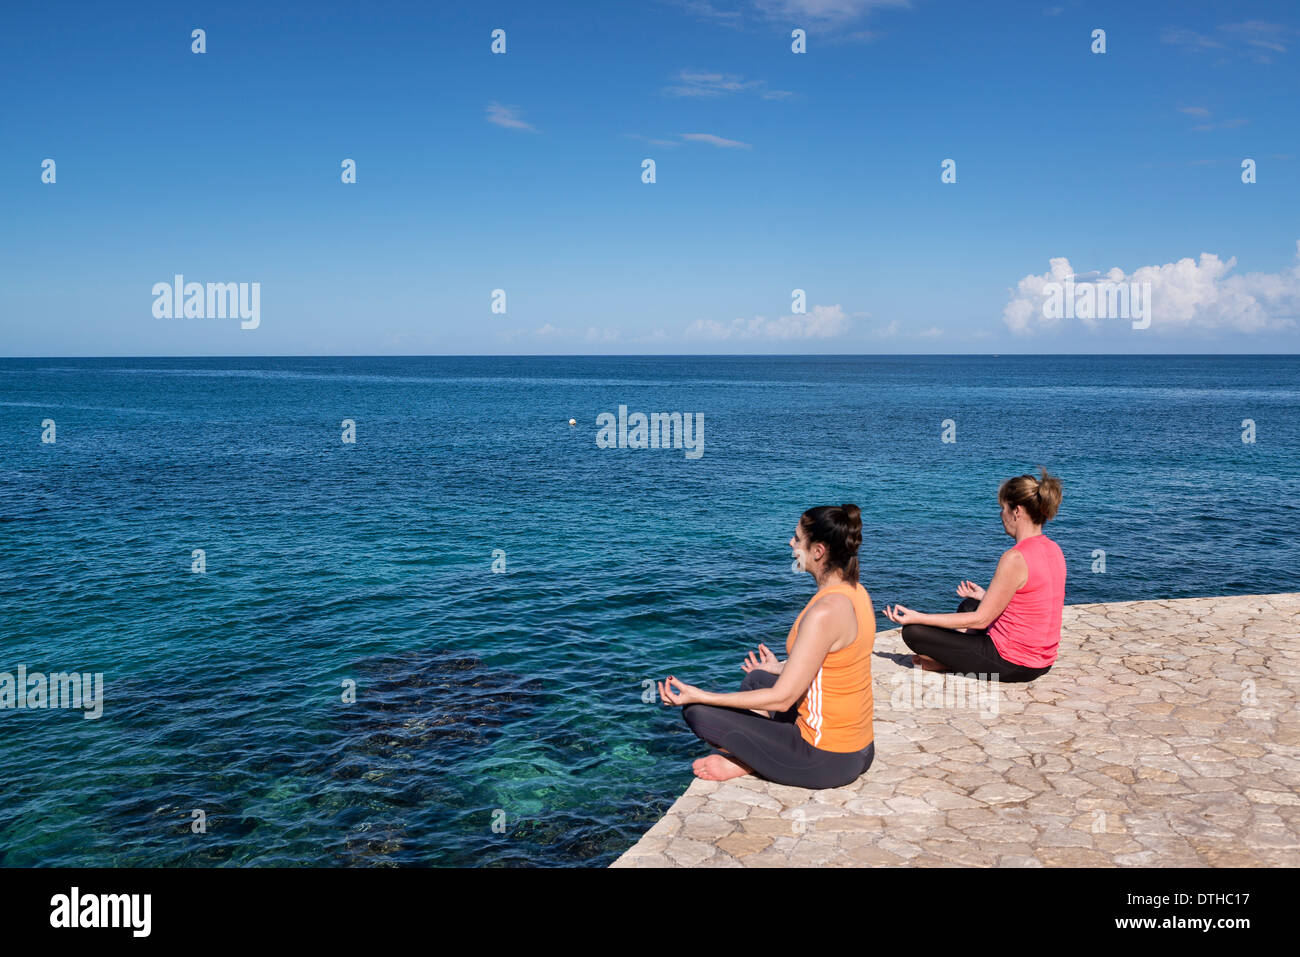 Women practice yoga meditation from an ocean waterfront ledge, Negril, Jamaica. Stock Photo